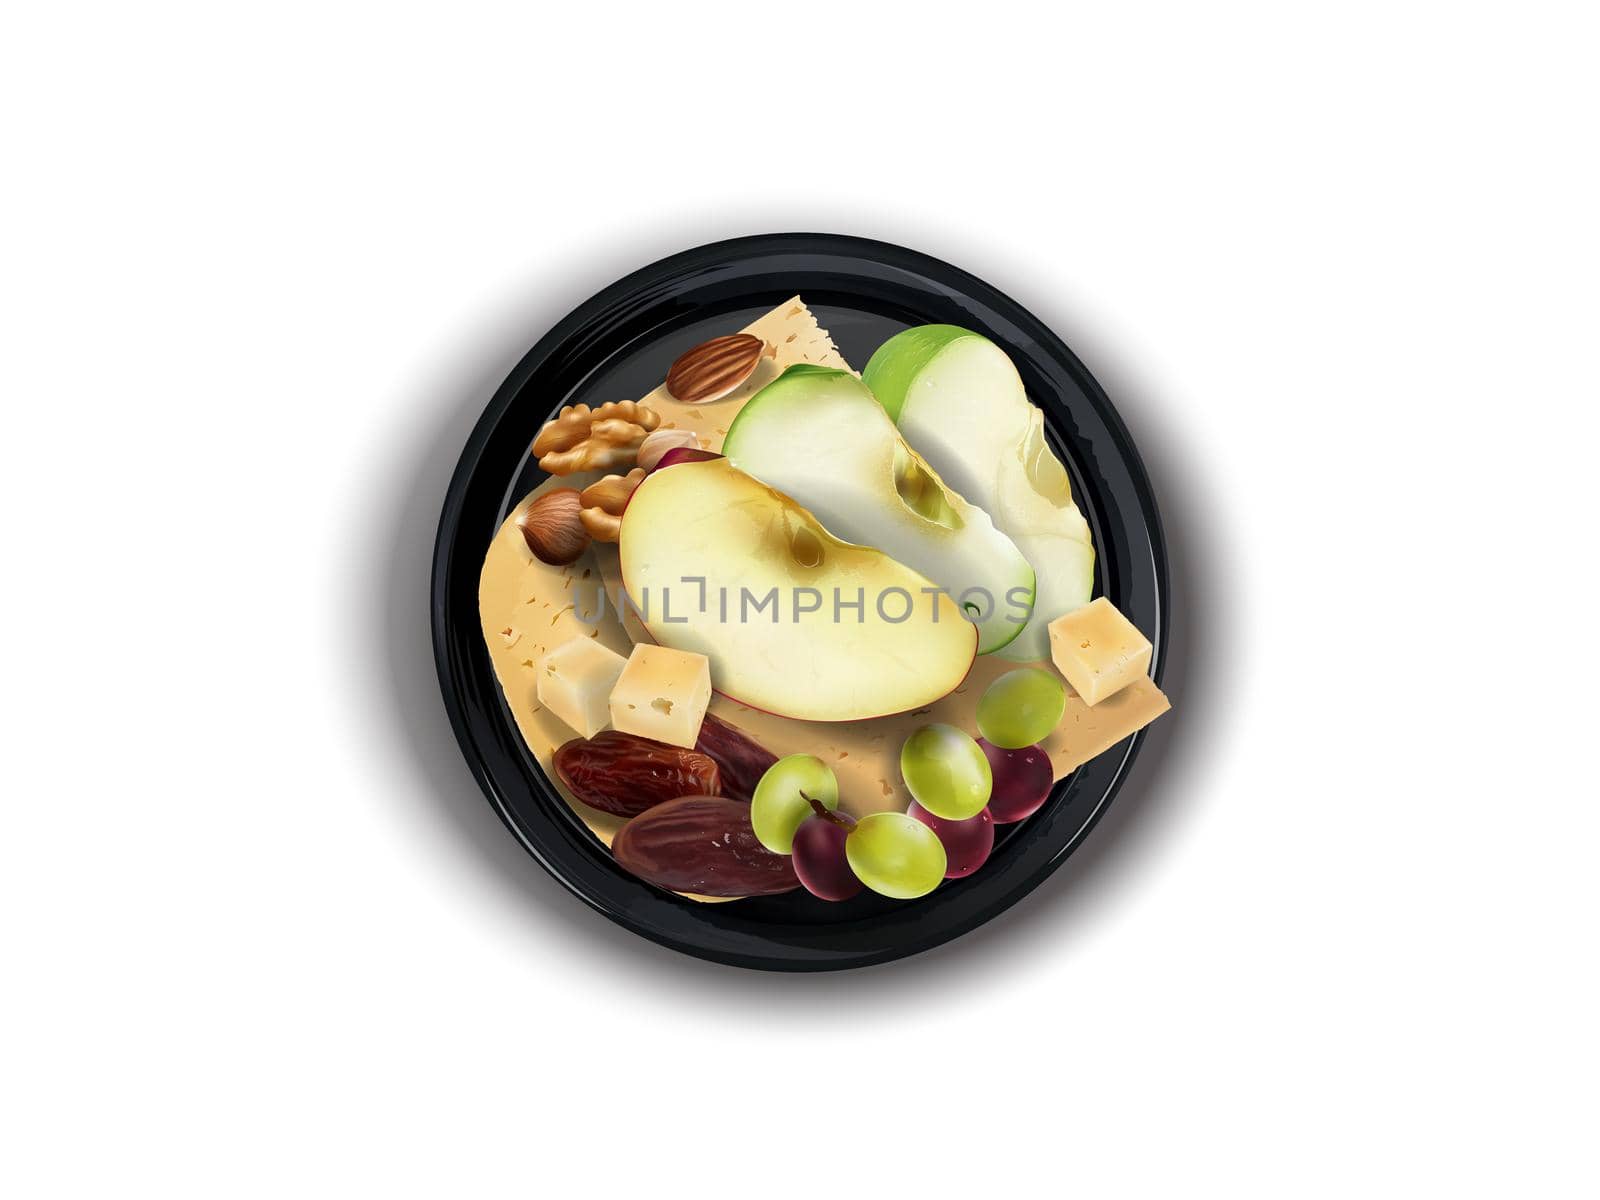 Black plate with cheese, nuts and fruits on a white background, top view. Realistic style illustration.